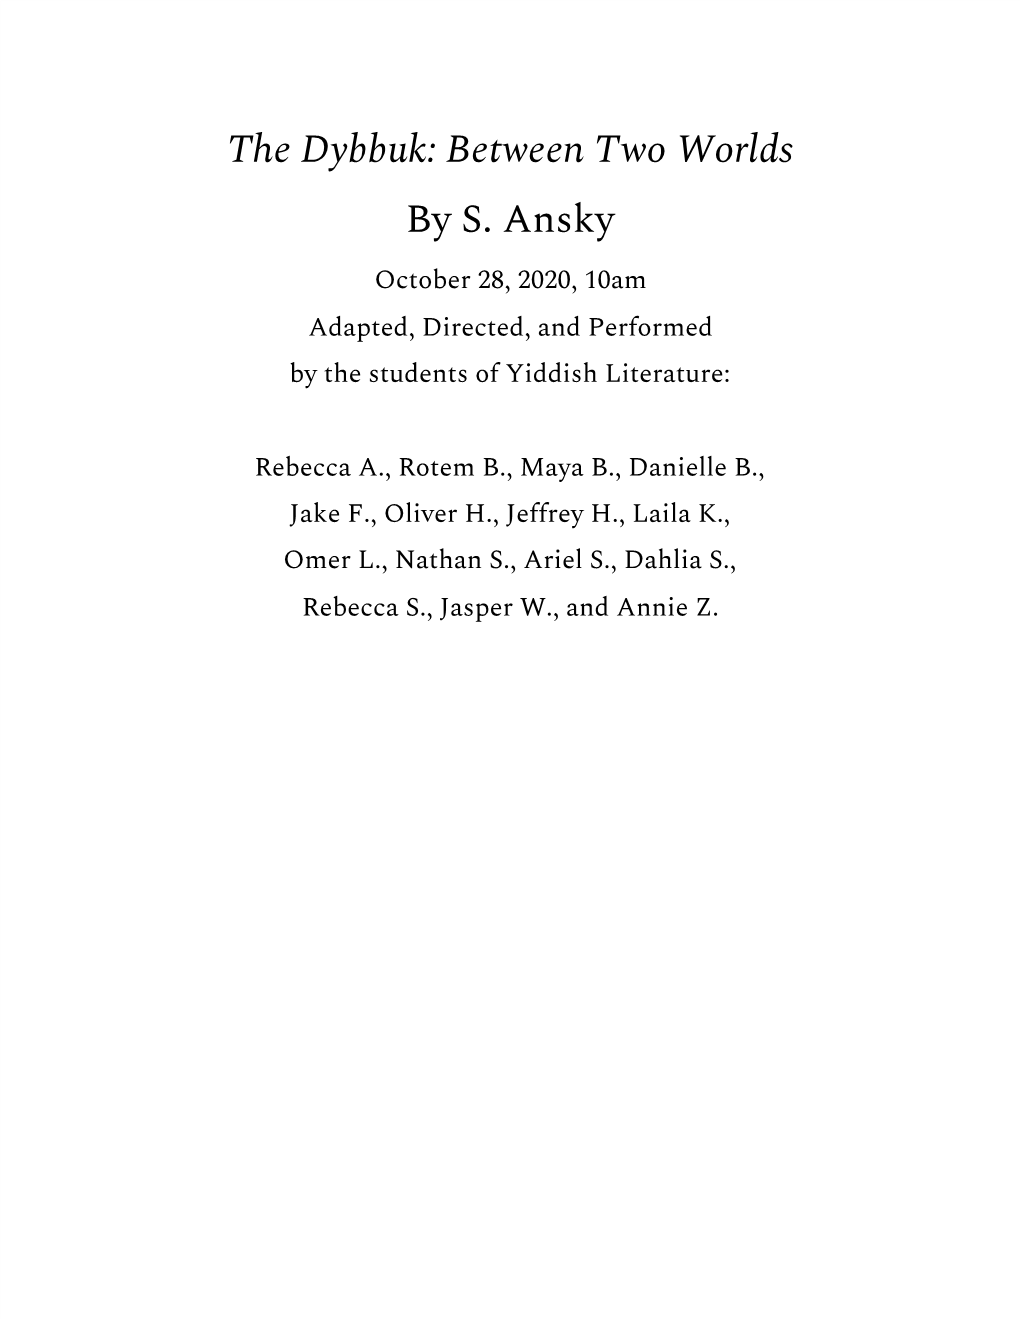 The Dybbuk: Between Two Worlds by S